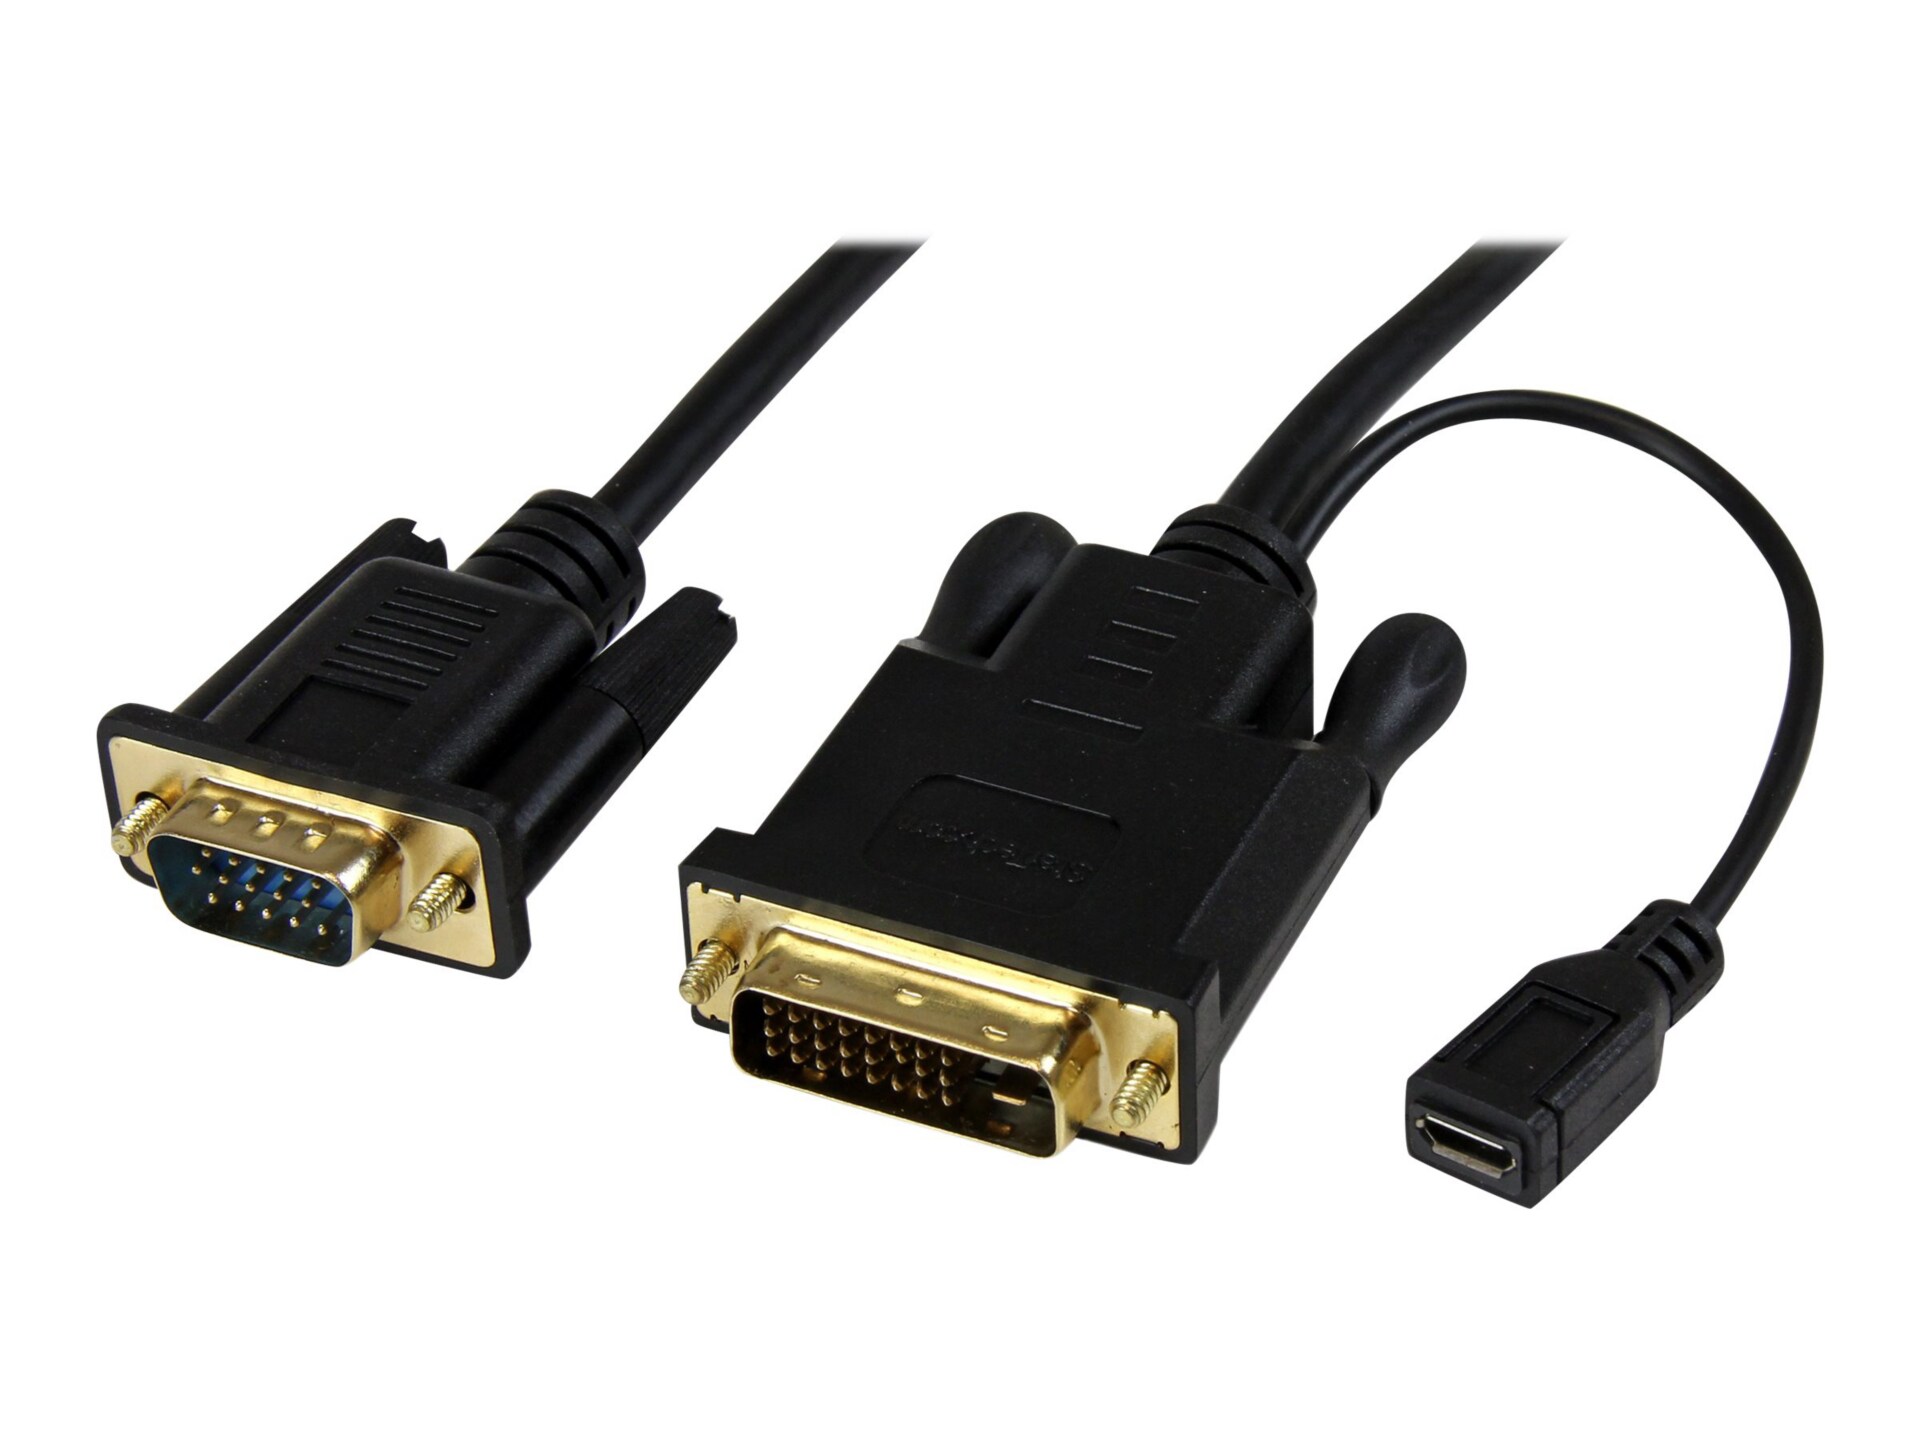 STARTECH 10FT DVI VGA ADAPTER CABLE